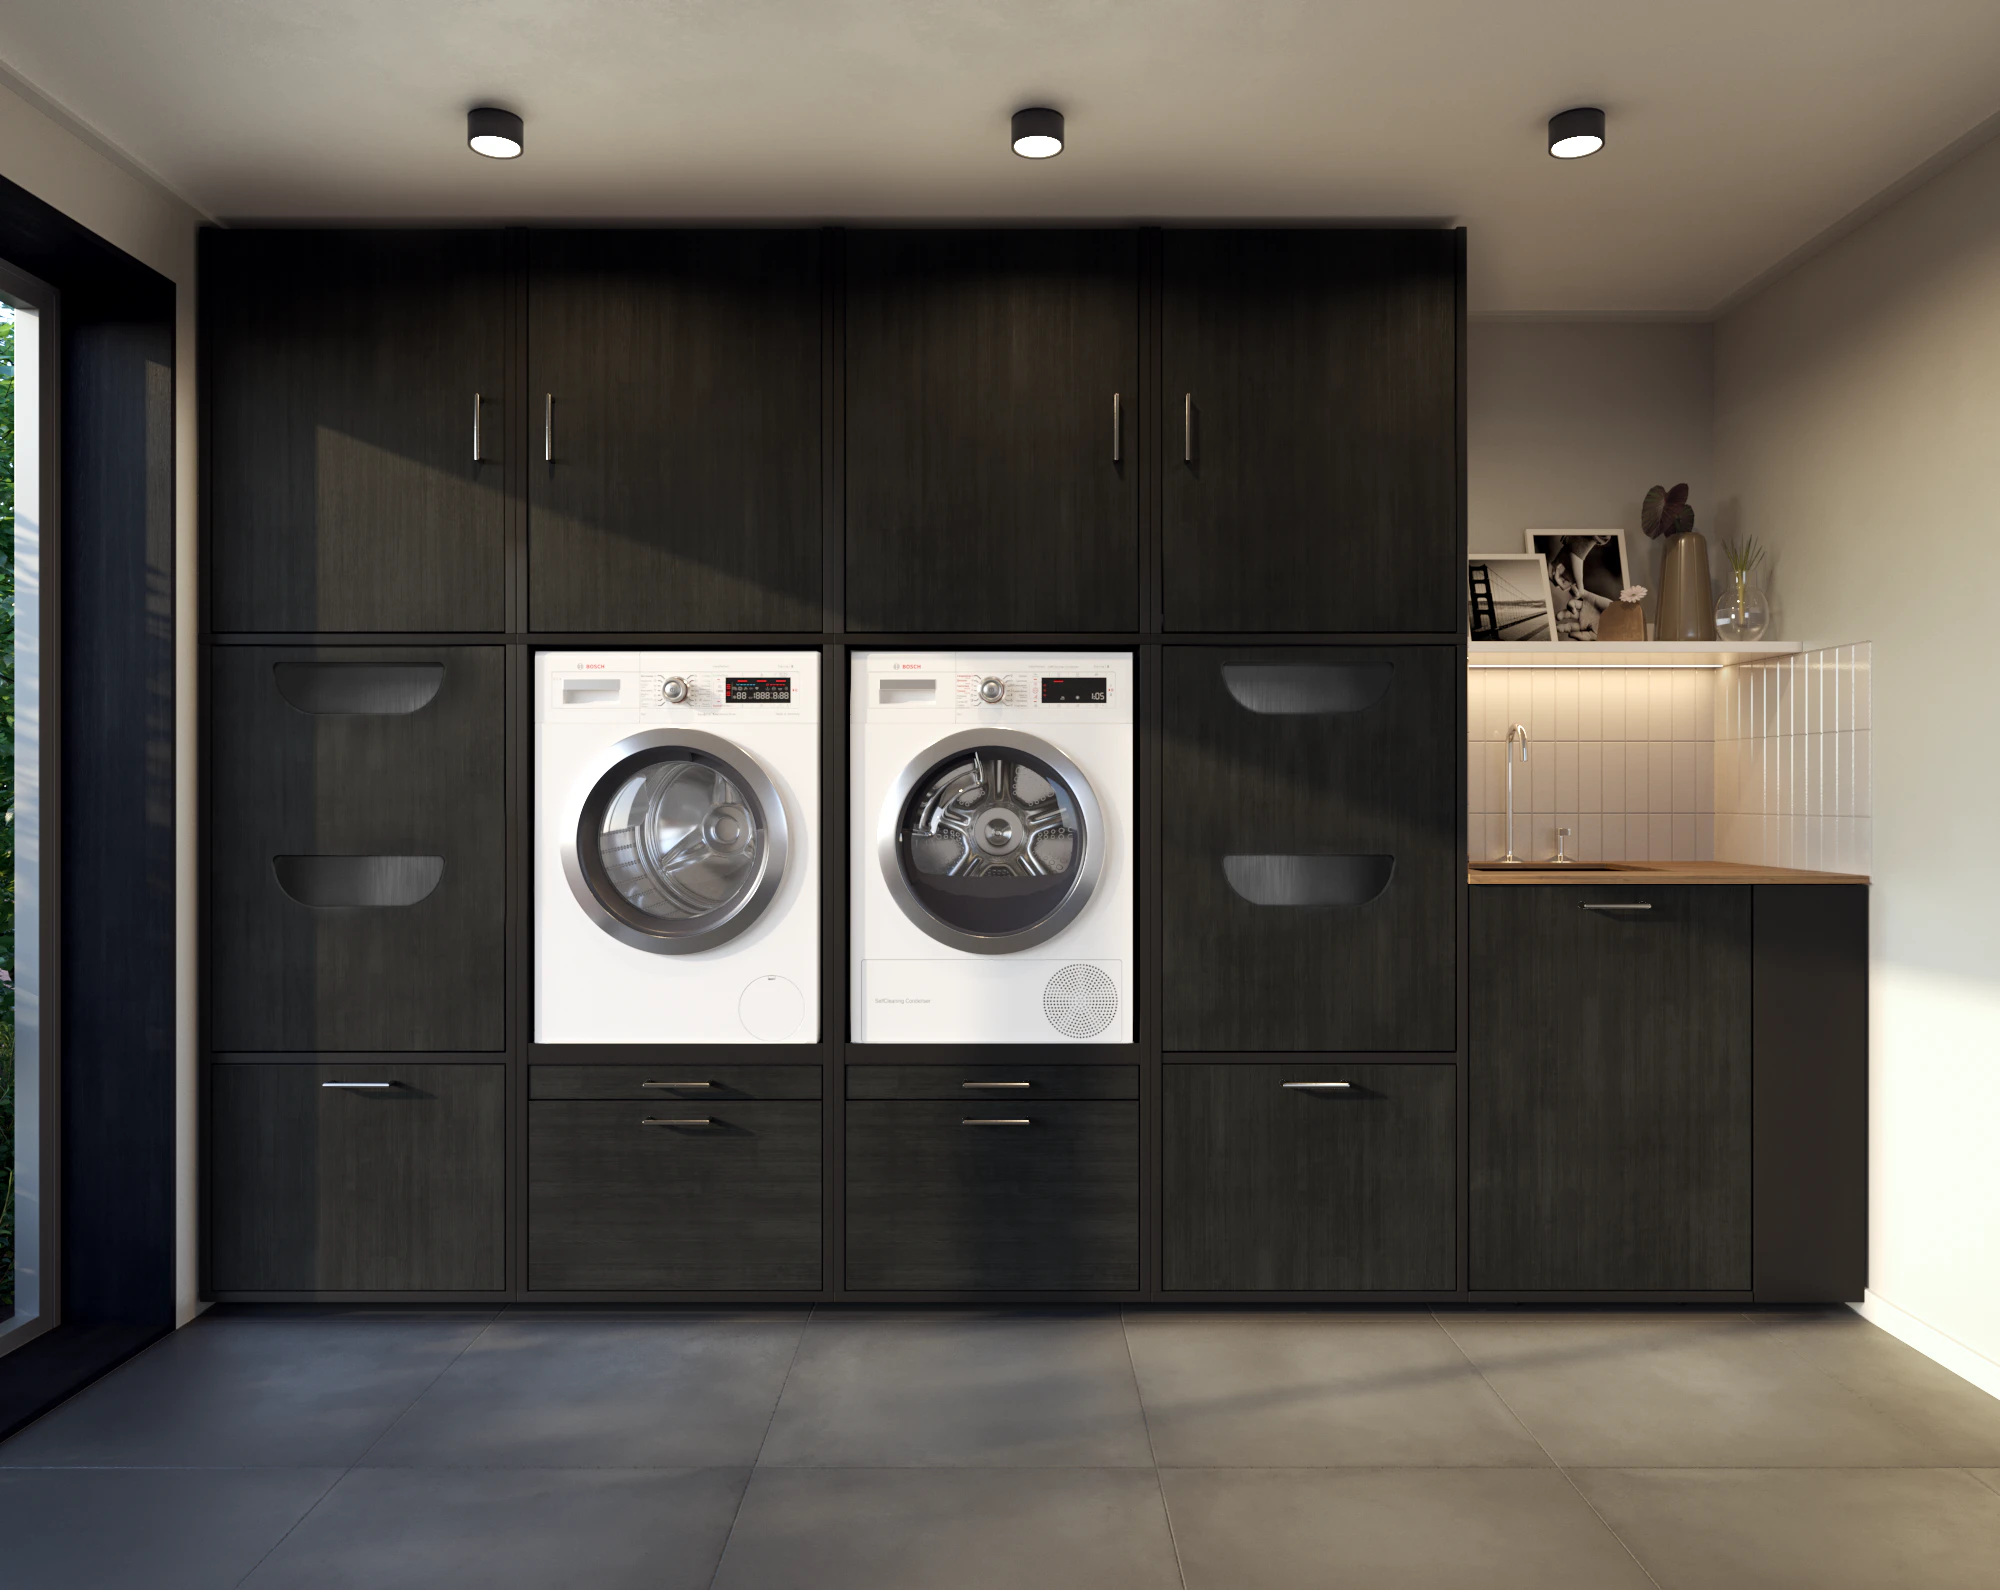 Lifestyle black washing machine and dryer wall cupboard with closed laundry basket cabinet in scullery